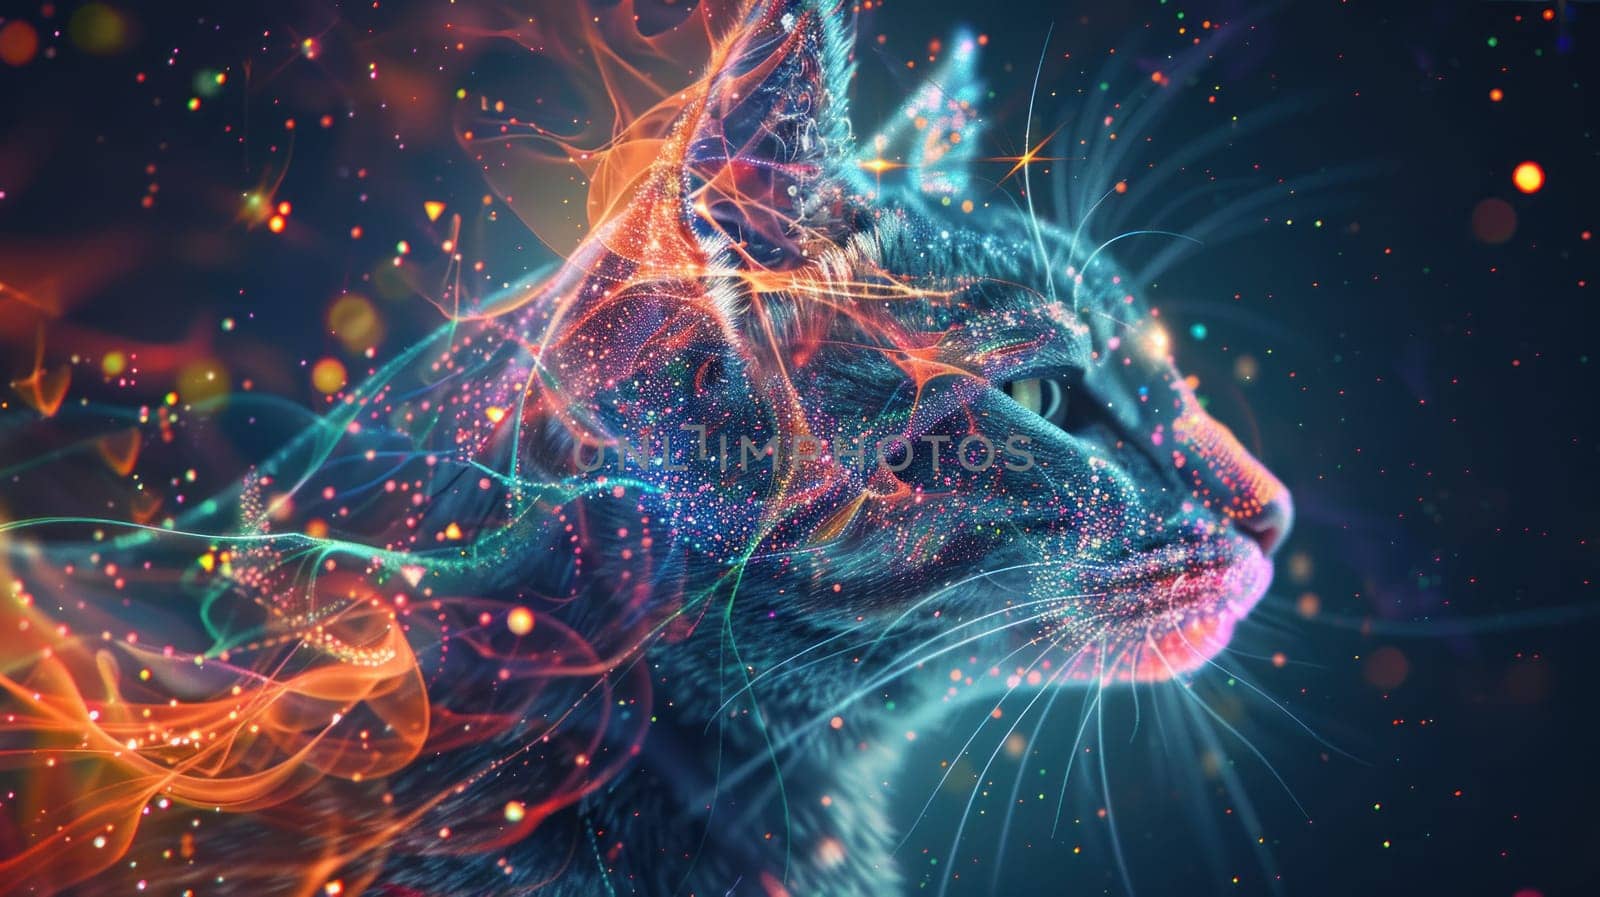 A cat with a colorful face is shown in a bright, colorful background. The cat's eyes are open and staring at the viewer, creating a sense of curiosity and wonder. Scene is playful and whimsical